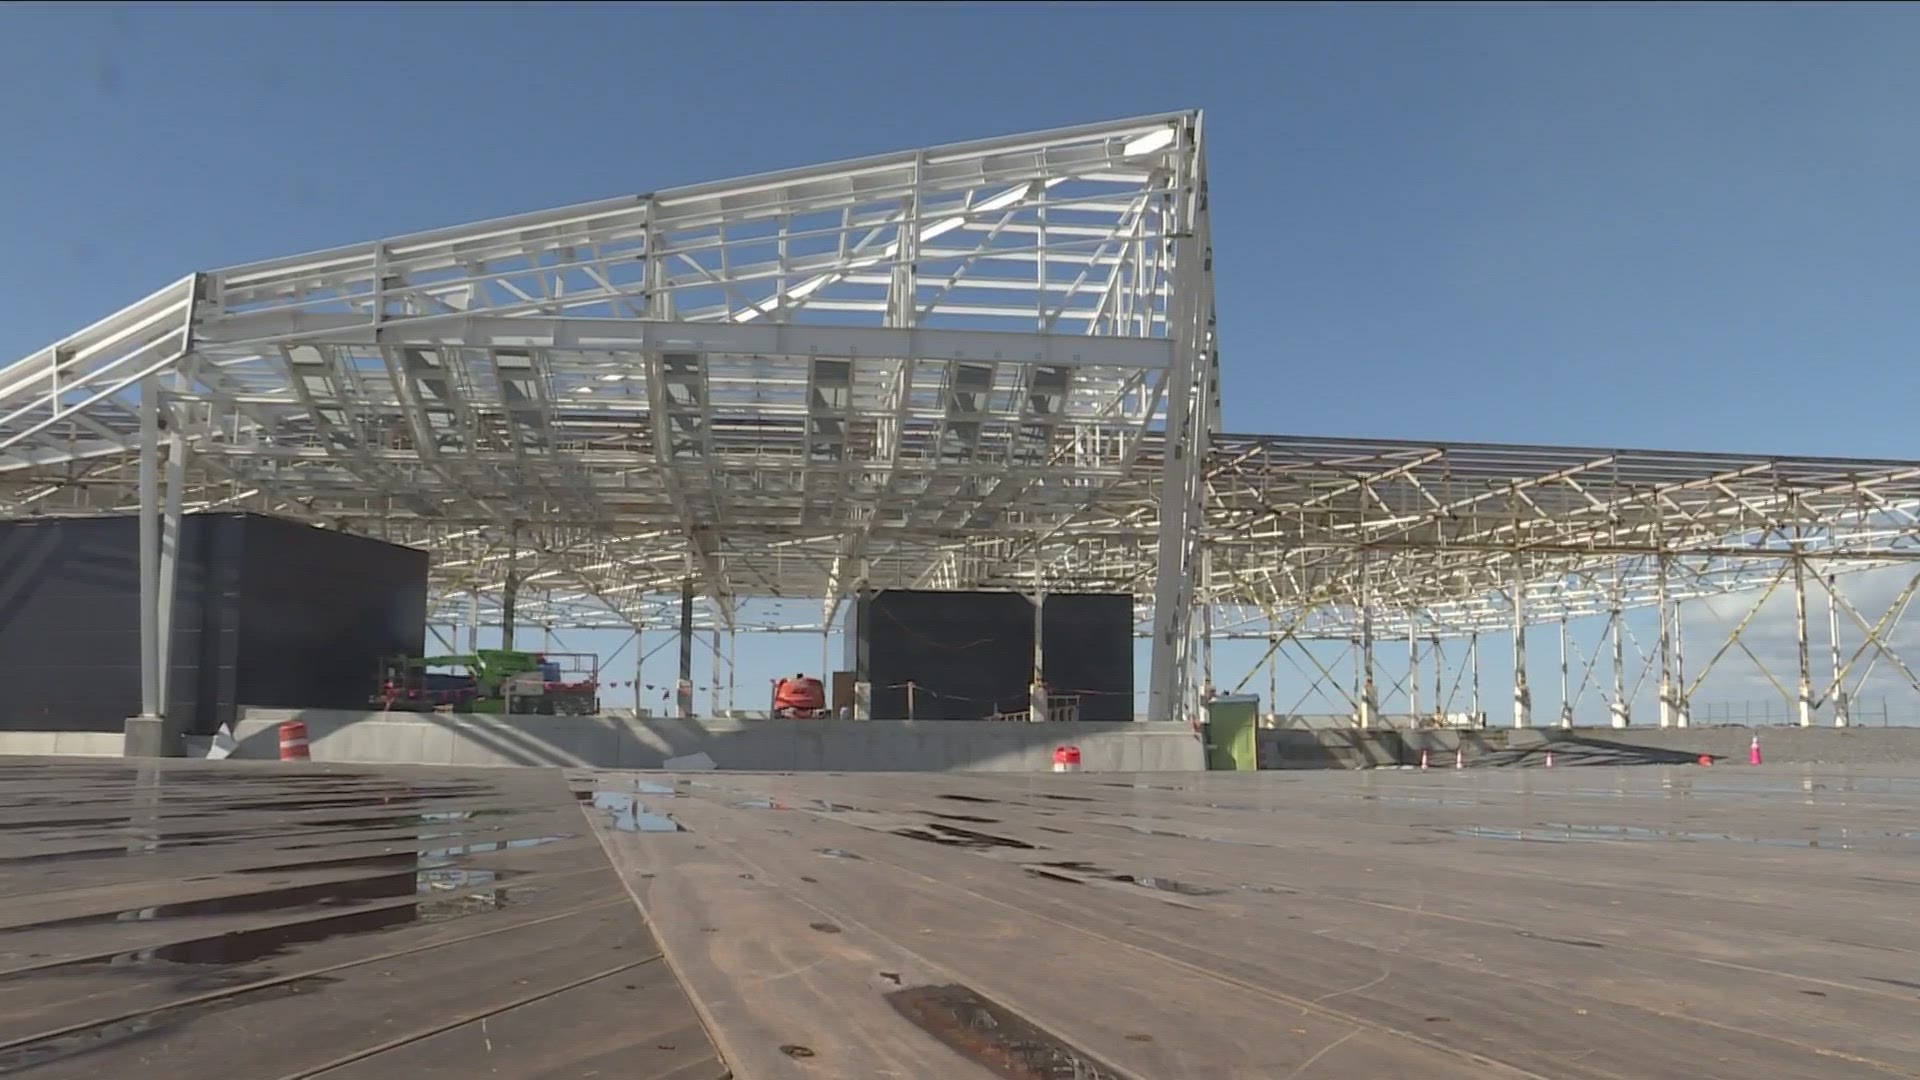 Once completed, the Fuhrmann Boulevard amphitheater will open up public access to another section of Buffalo's waterfront.